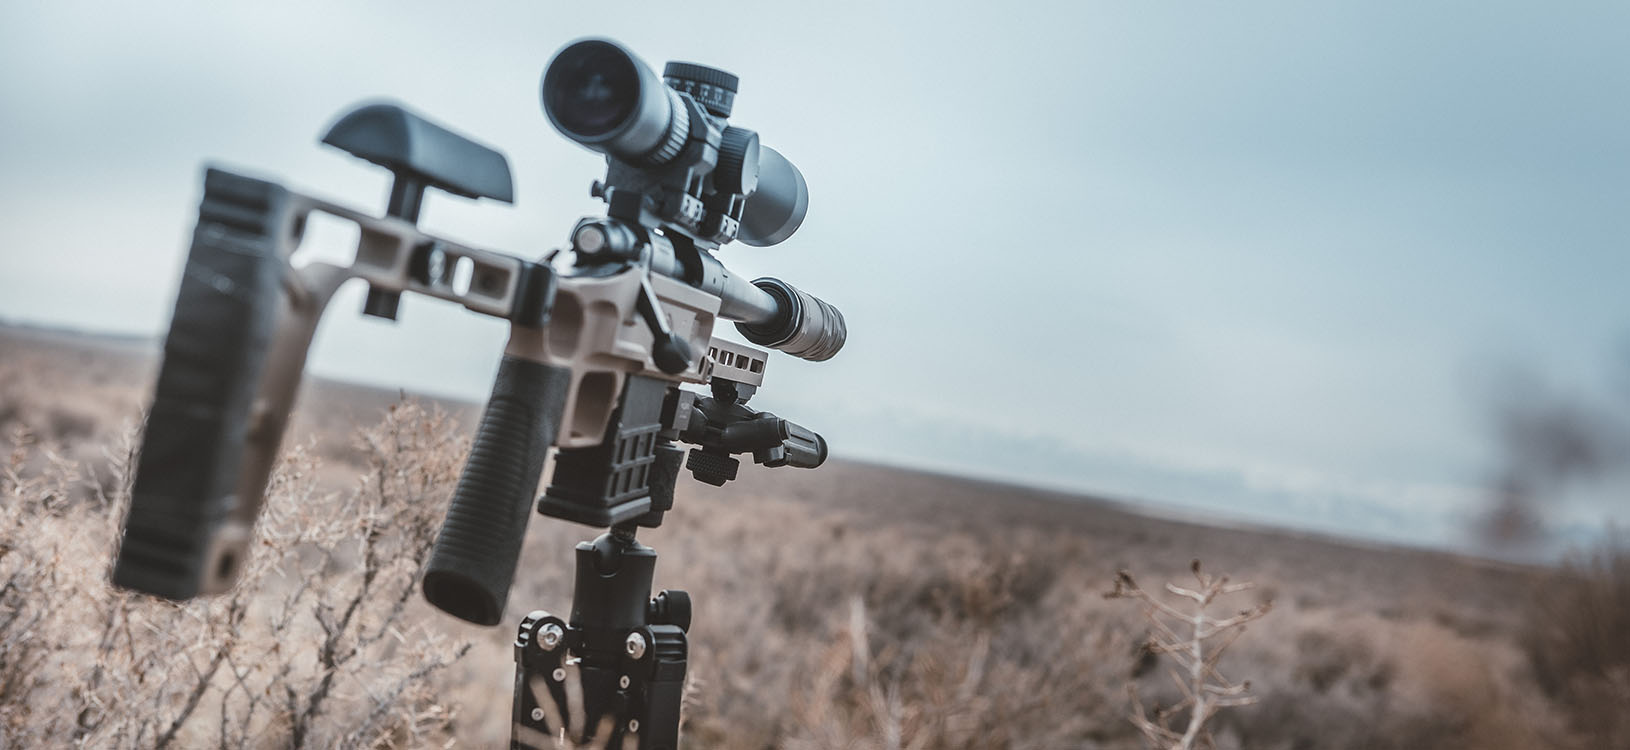 How to use a mil dot reticle scope for range finding?